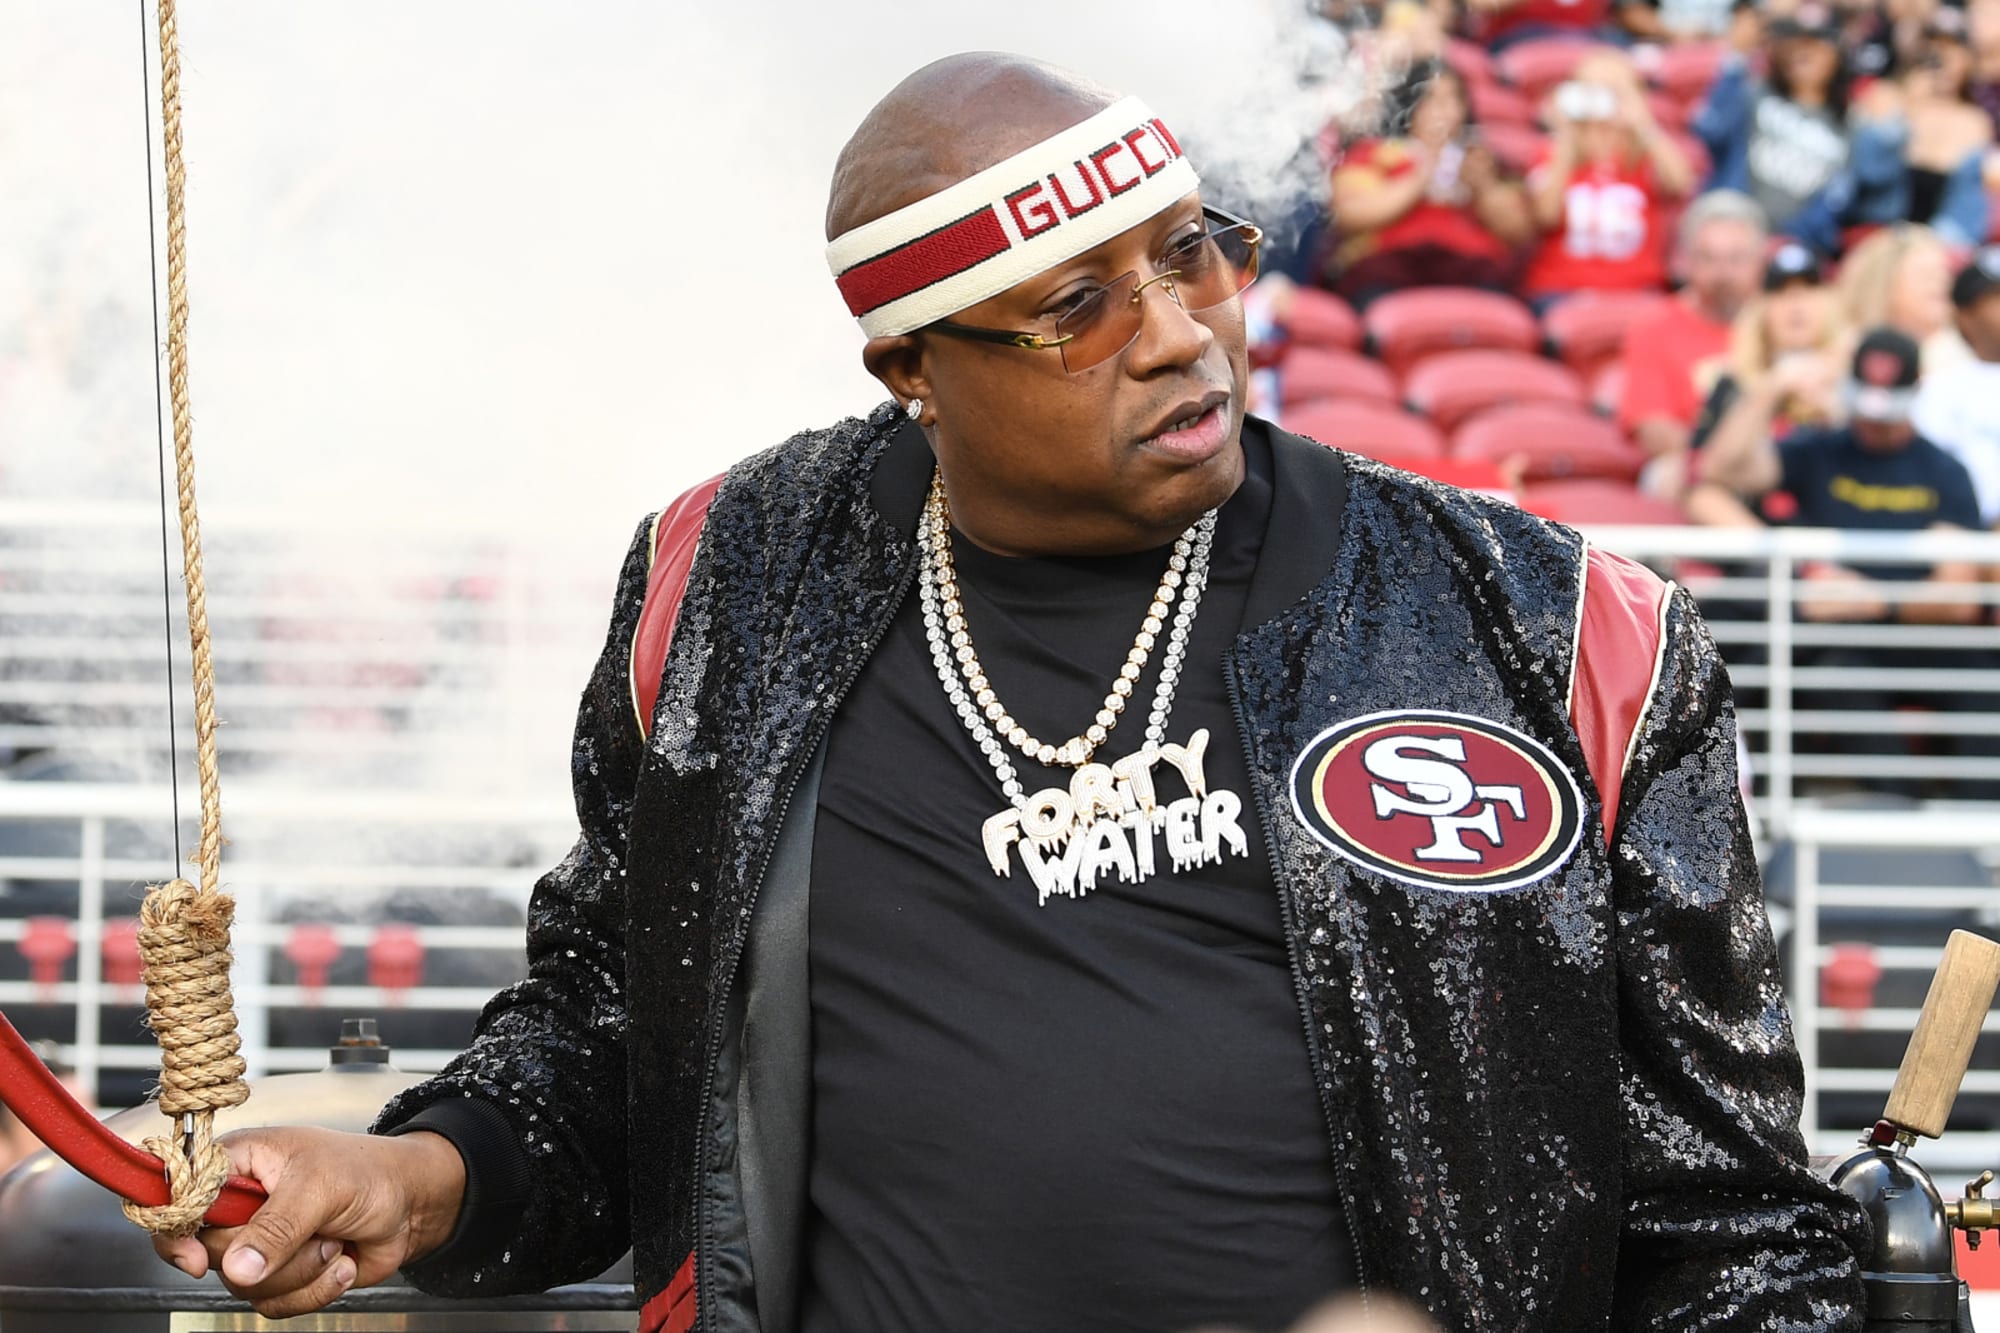 selvbiografi Antologi Edition 10 celebrities you didn't know were massive 49ers fans